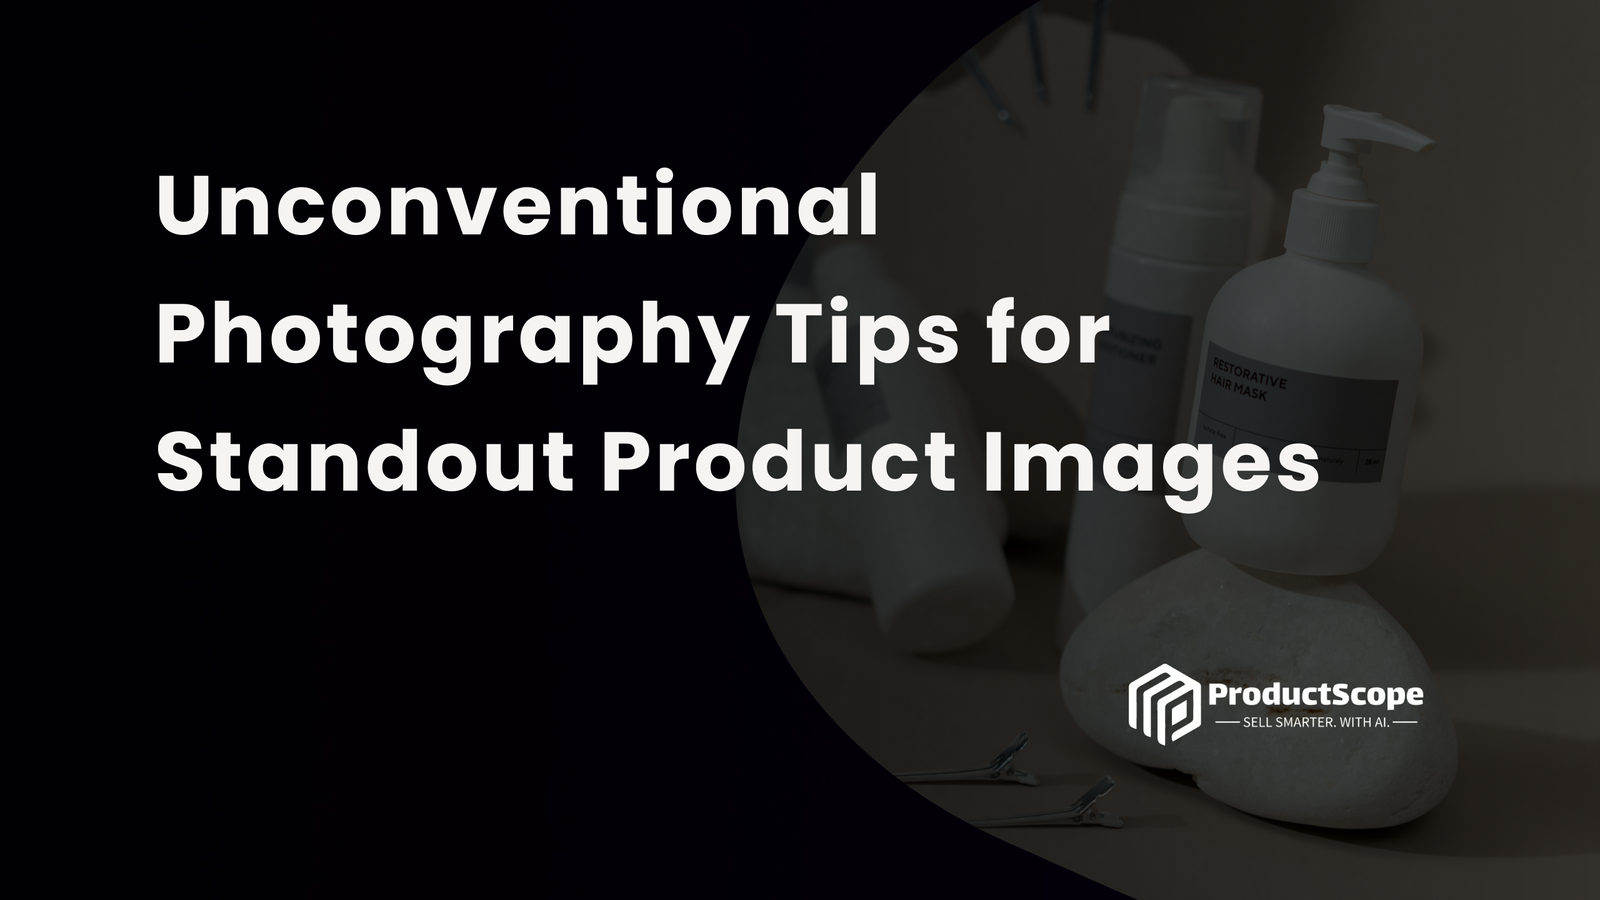 Unconventional Photography Tips for Standout Product Images